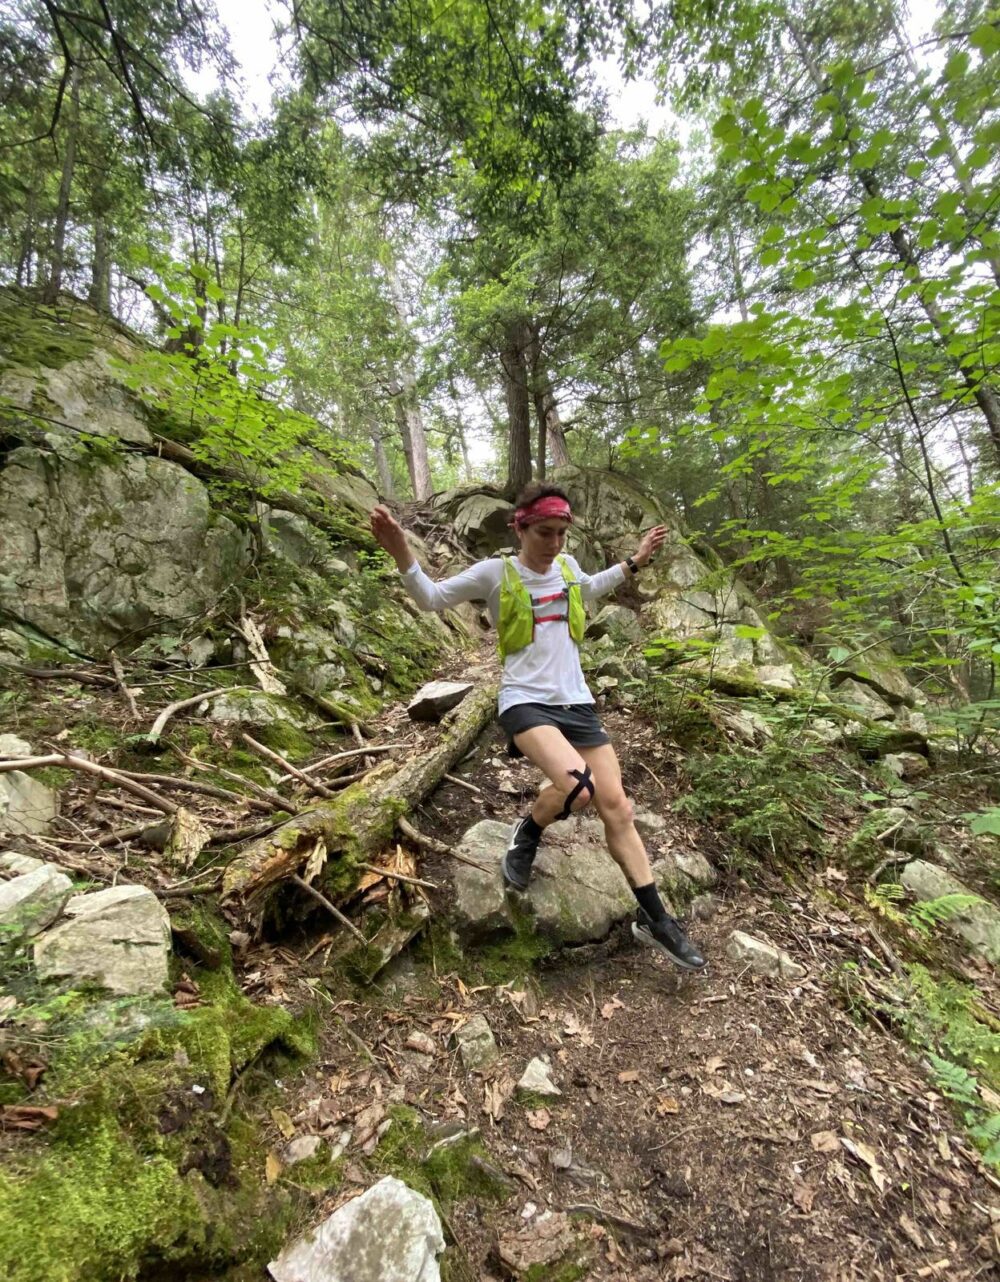 A person wearing a white long-sleeve shirt, shorts, and a red cap playfully jumping with arms spread wide on a rocky forest trail, surrounded by green trees and large rocks.